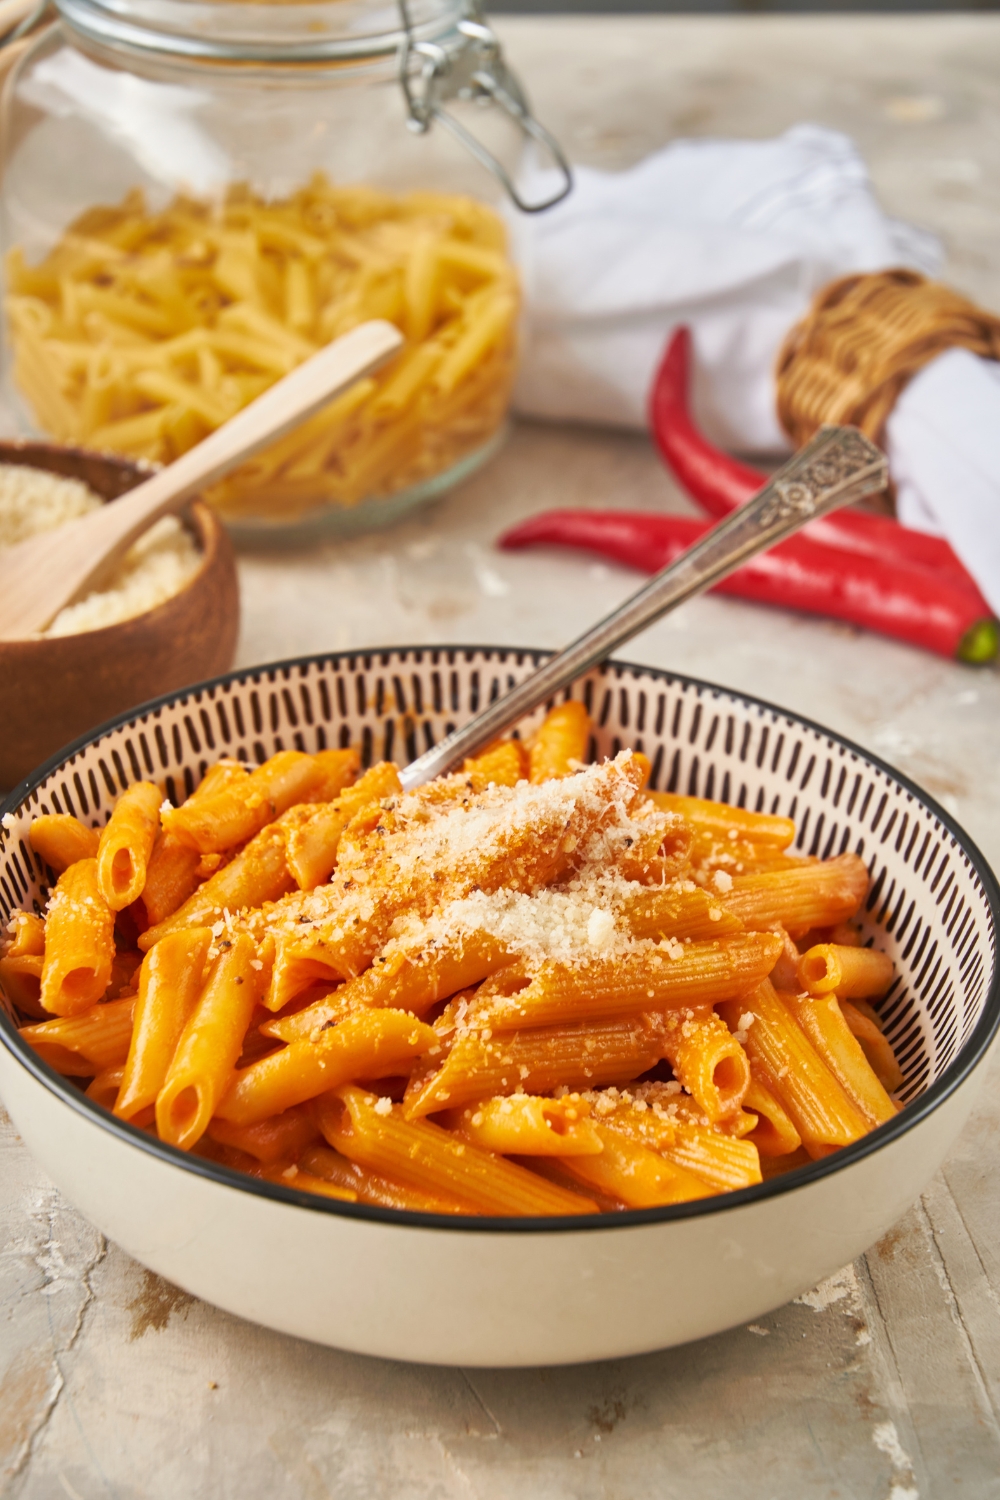 A bowl of Carbone spicy rigatoni garnished with grated parmesan cheese and in the background is a jar of dried pasta and a bowl of parmesan cheese with a fork in it.